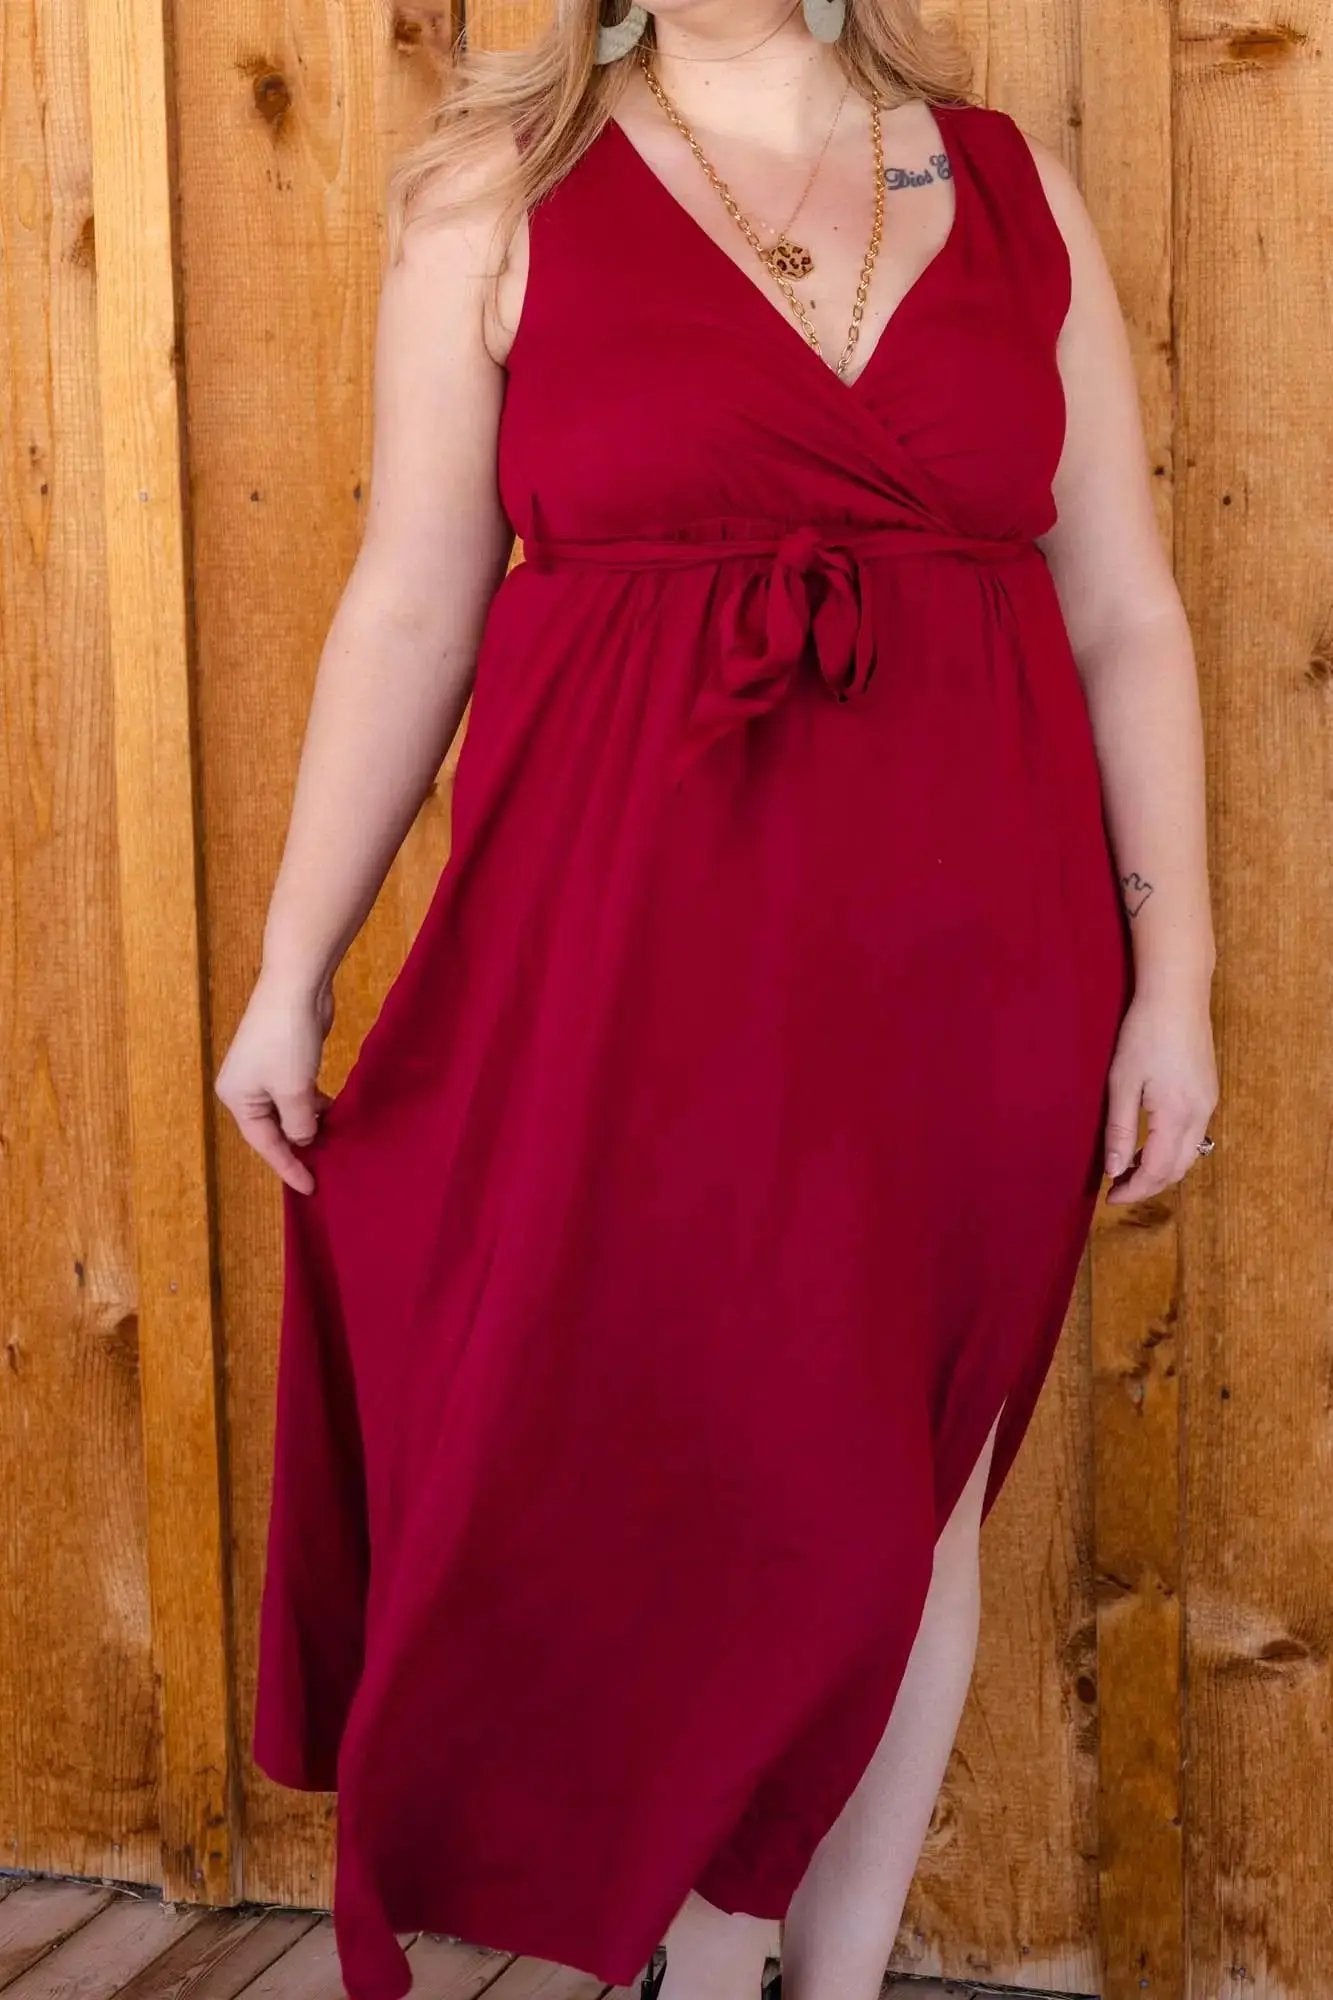 Woman in a wine red V Neck Cross-Tie Sleeve dress from Don't Be Chy Boutique posing between wooden beams, with visible chunky gold necklace and beige heels.